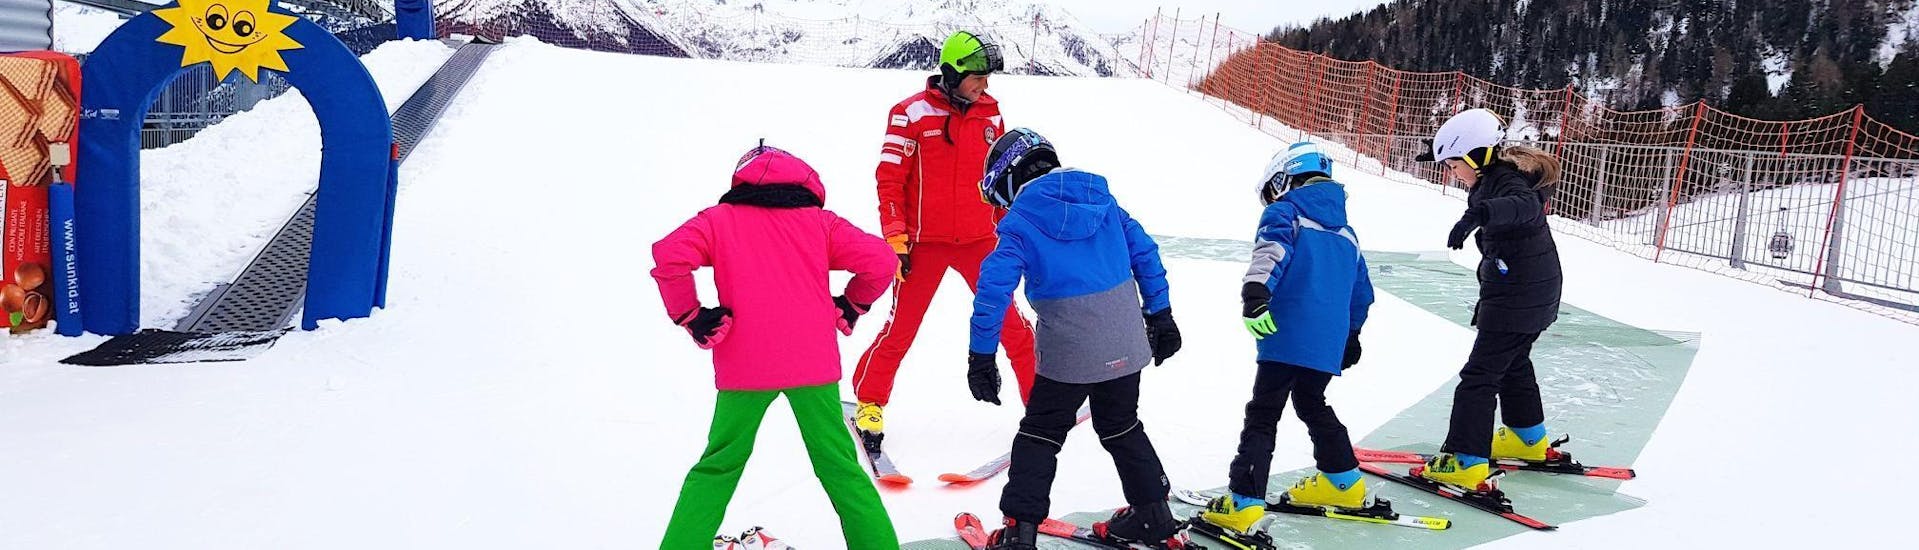 Ski instructors with kids ready for the ski lesson in Speikboden Campo Tures - Sand in Taufers during a Private Group Ski Lesson VIP Club for Kids. 